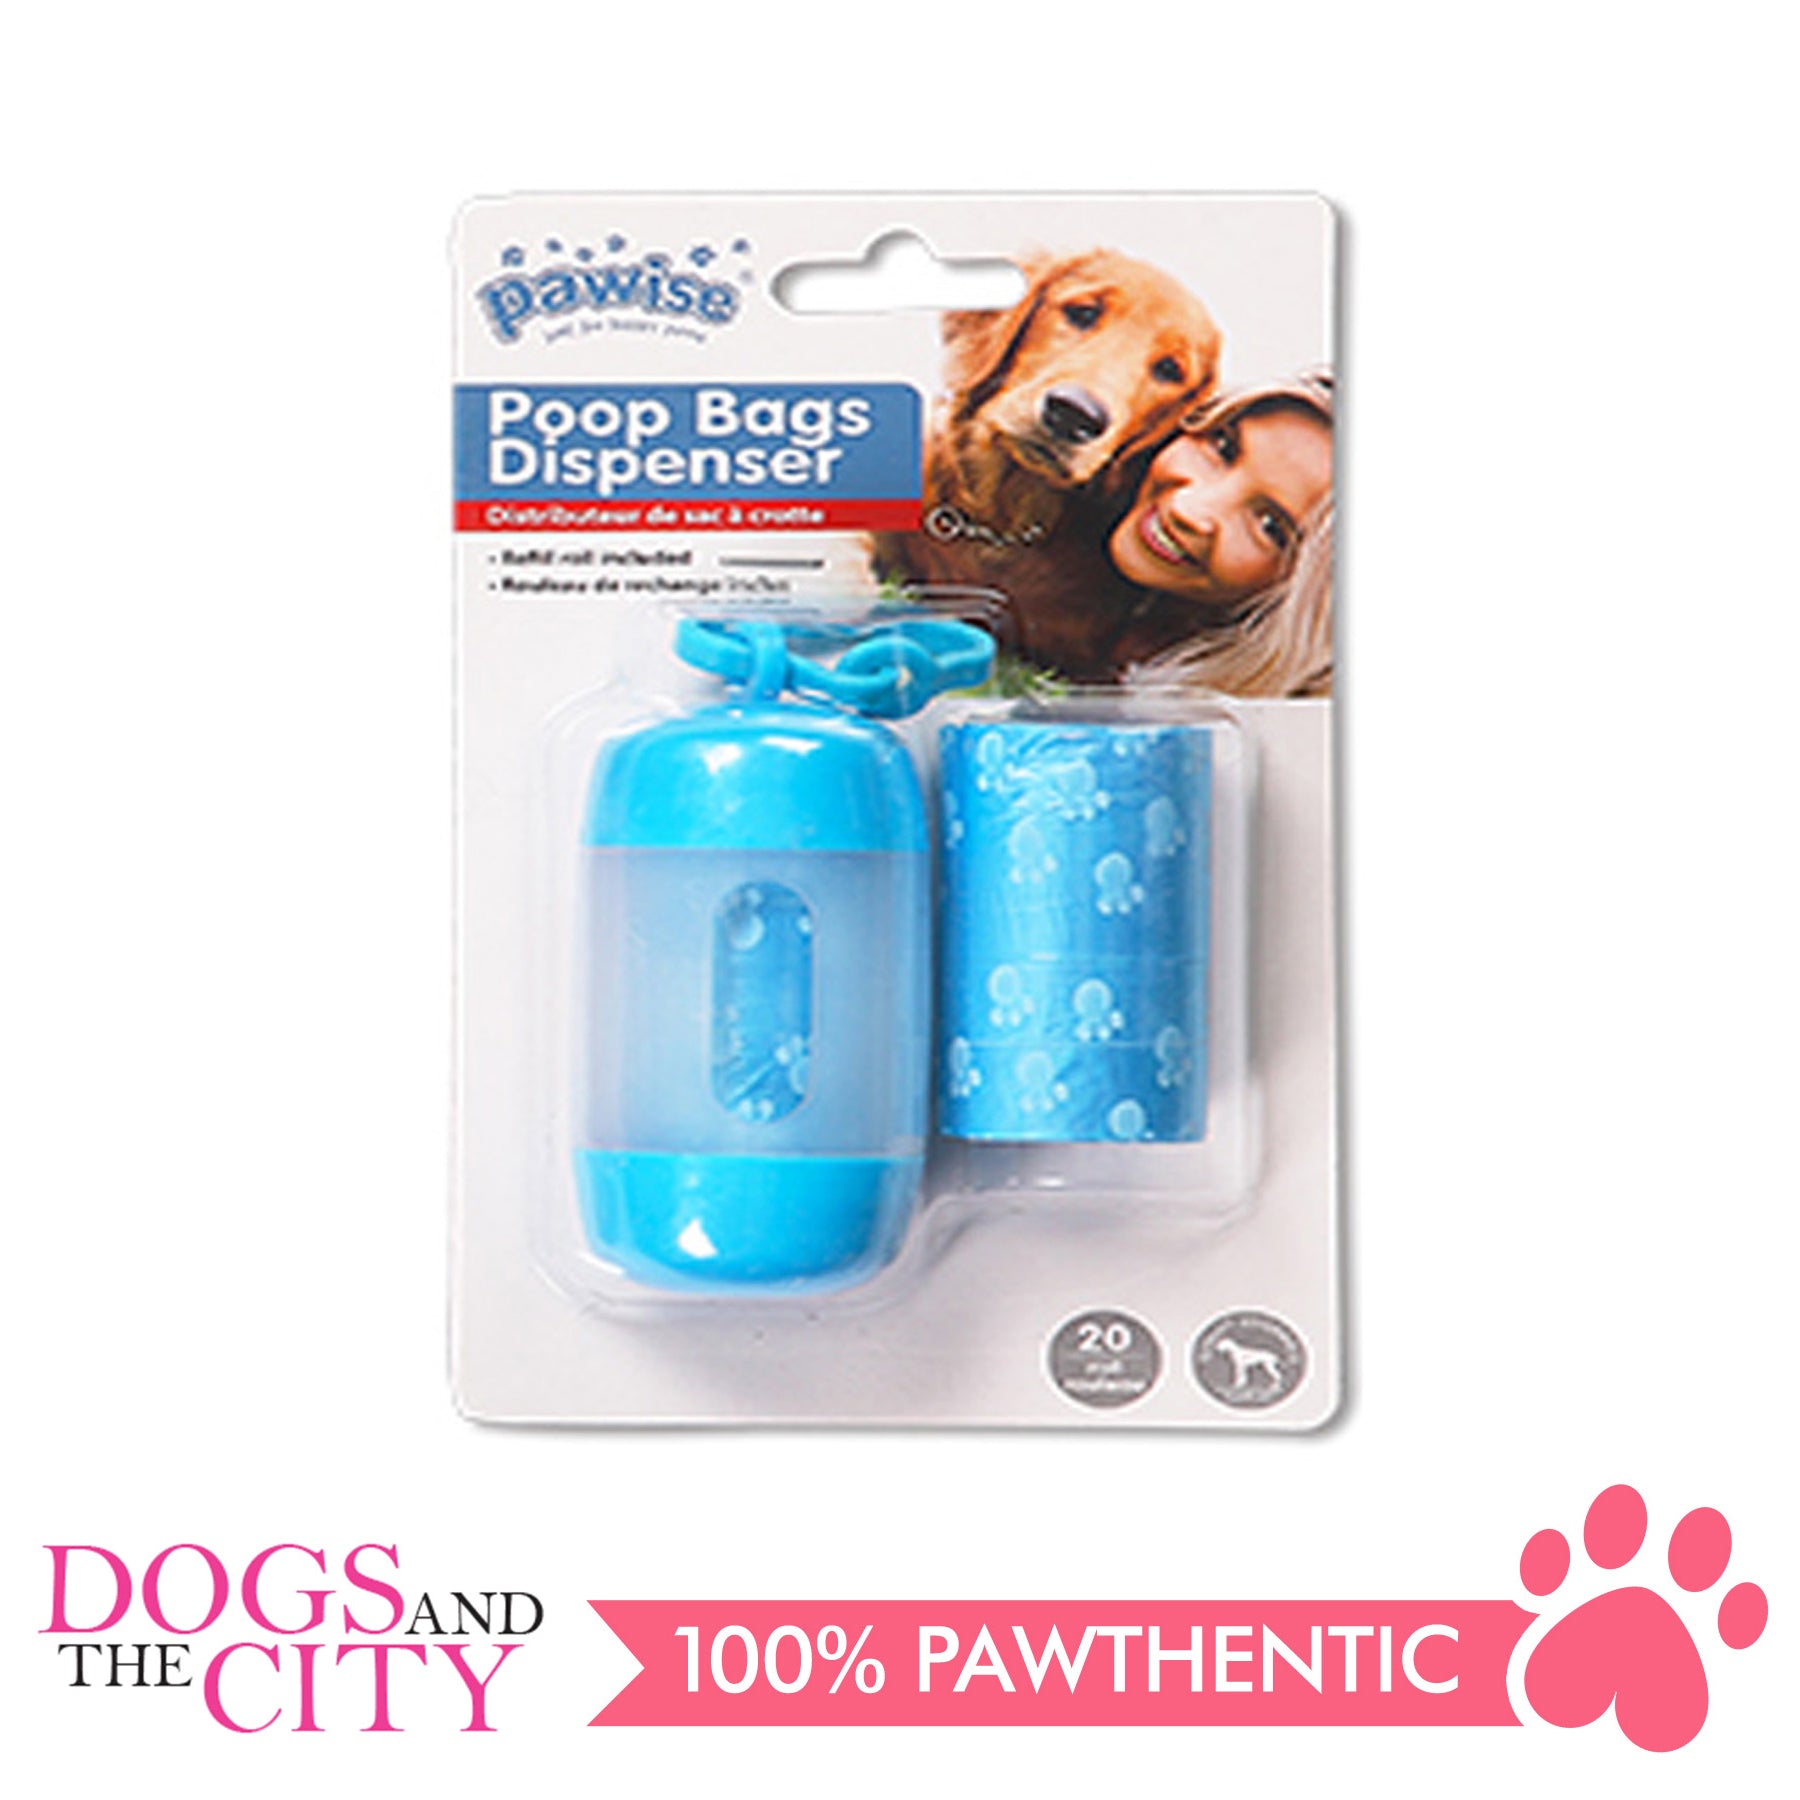 Pawty in the USA Poop Bag Dispenser – Vixen Fluffy Paws